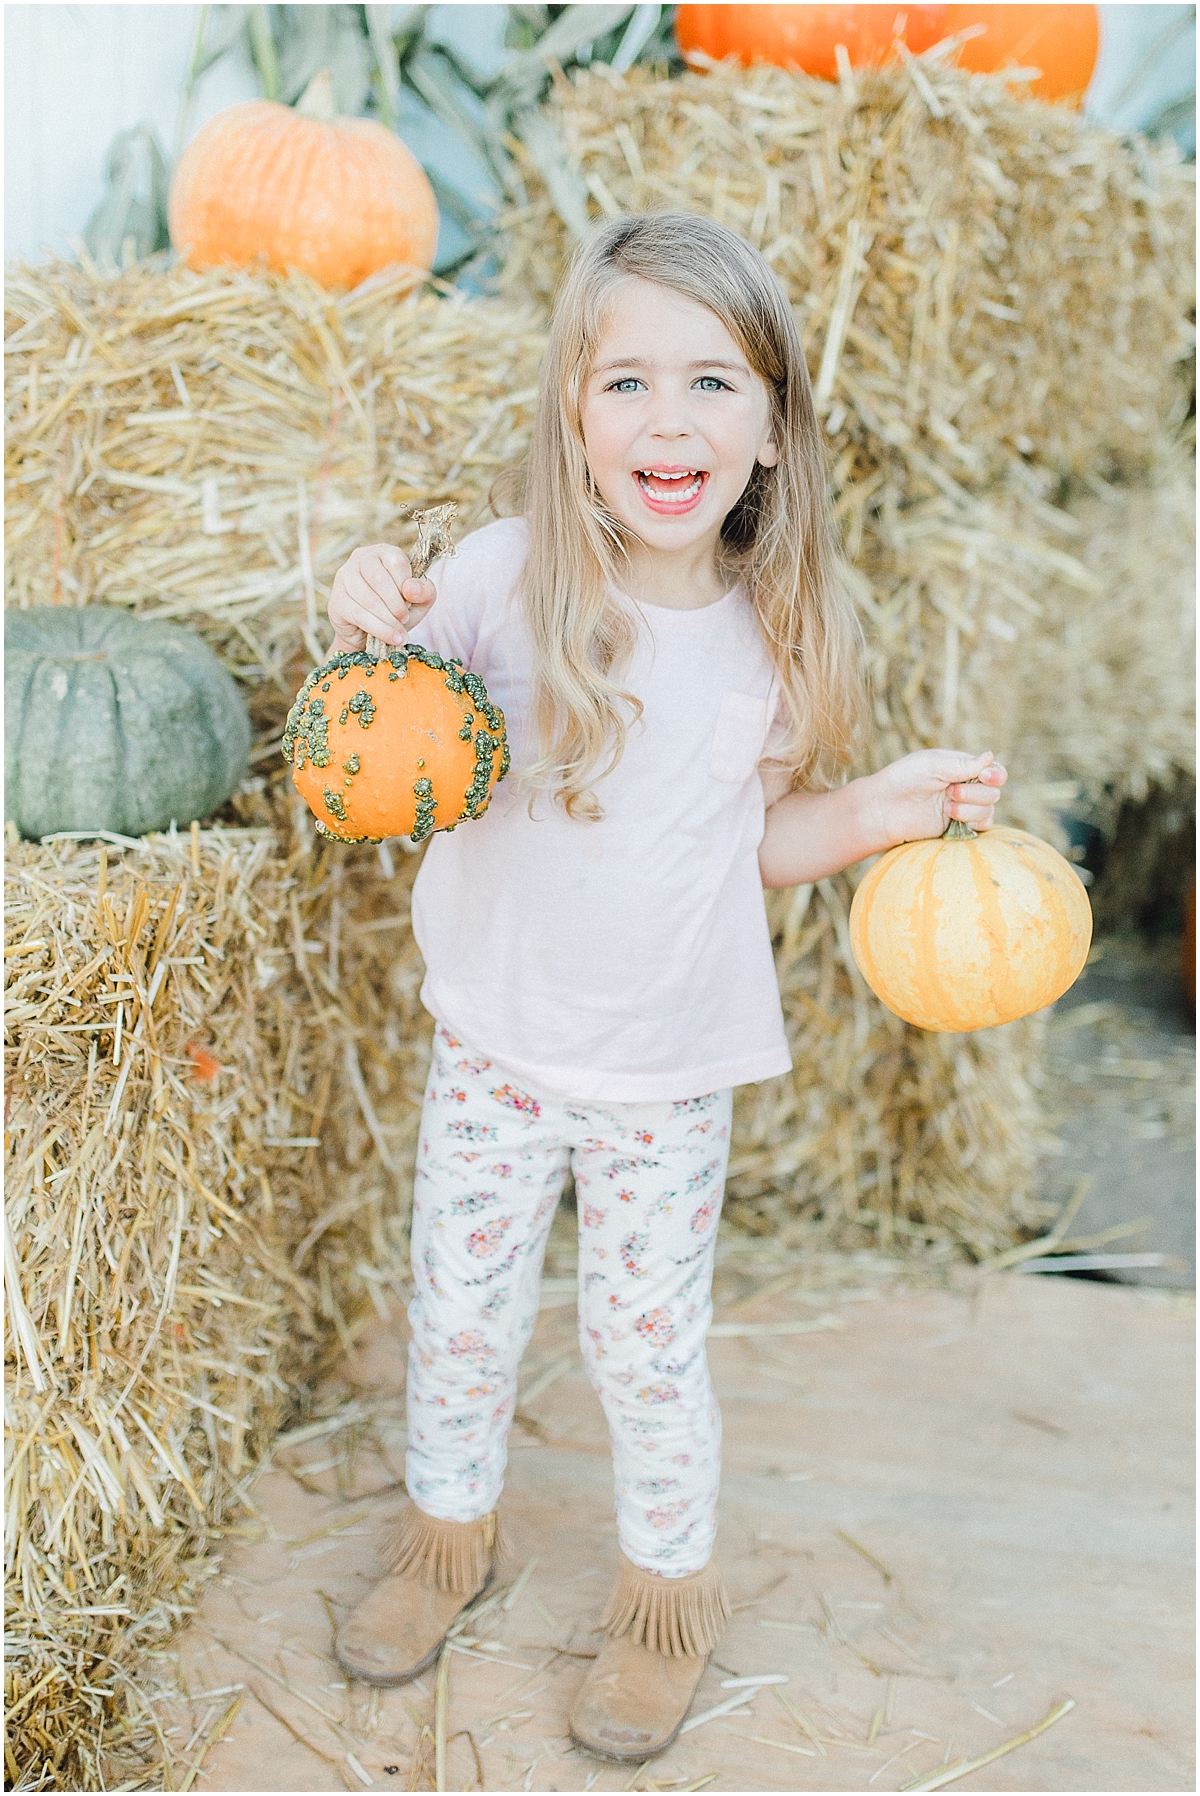 Pumpkin Patch Photo Shoot With Toddler and Mommy | Emma Rose Company Seattle Portland Light and Airy Wedding Photographer | Kindred Presets | Film_0004.jpg